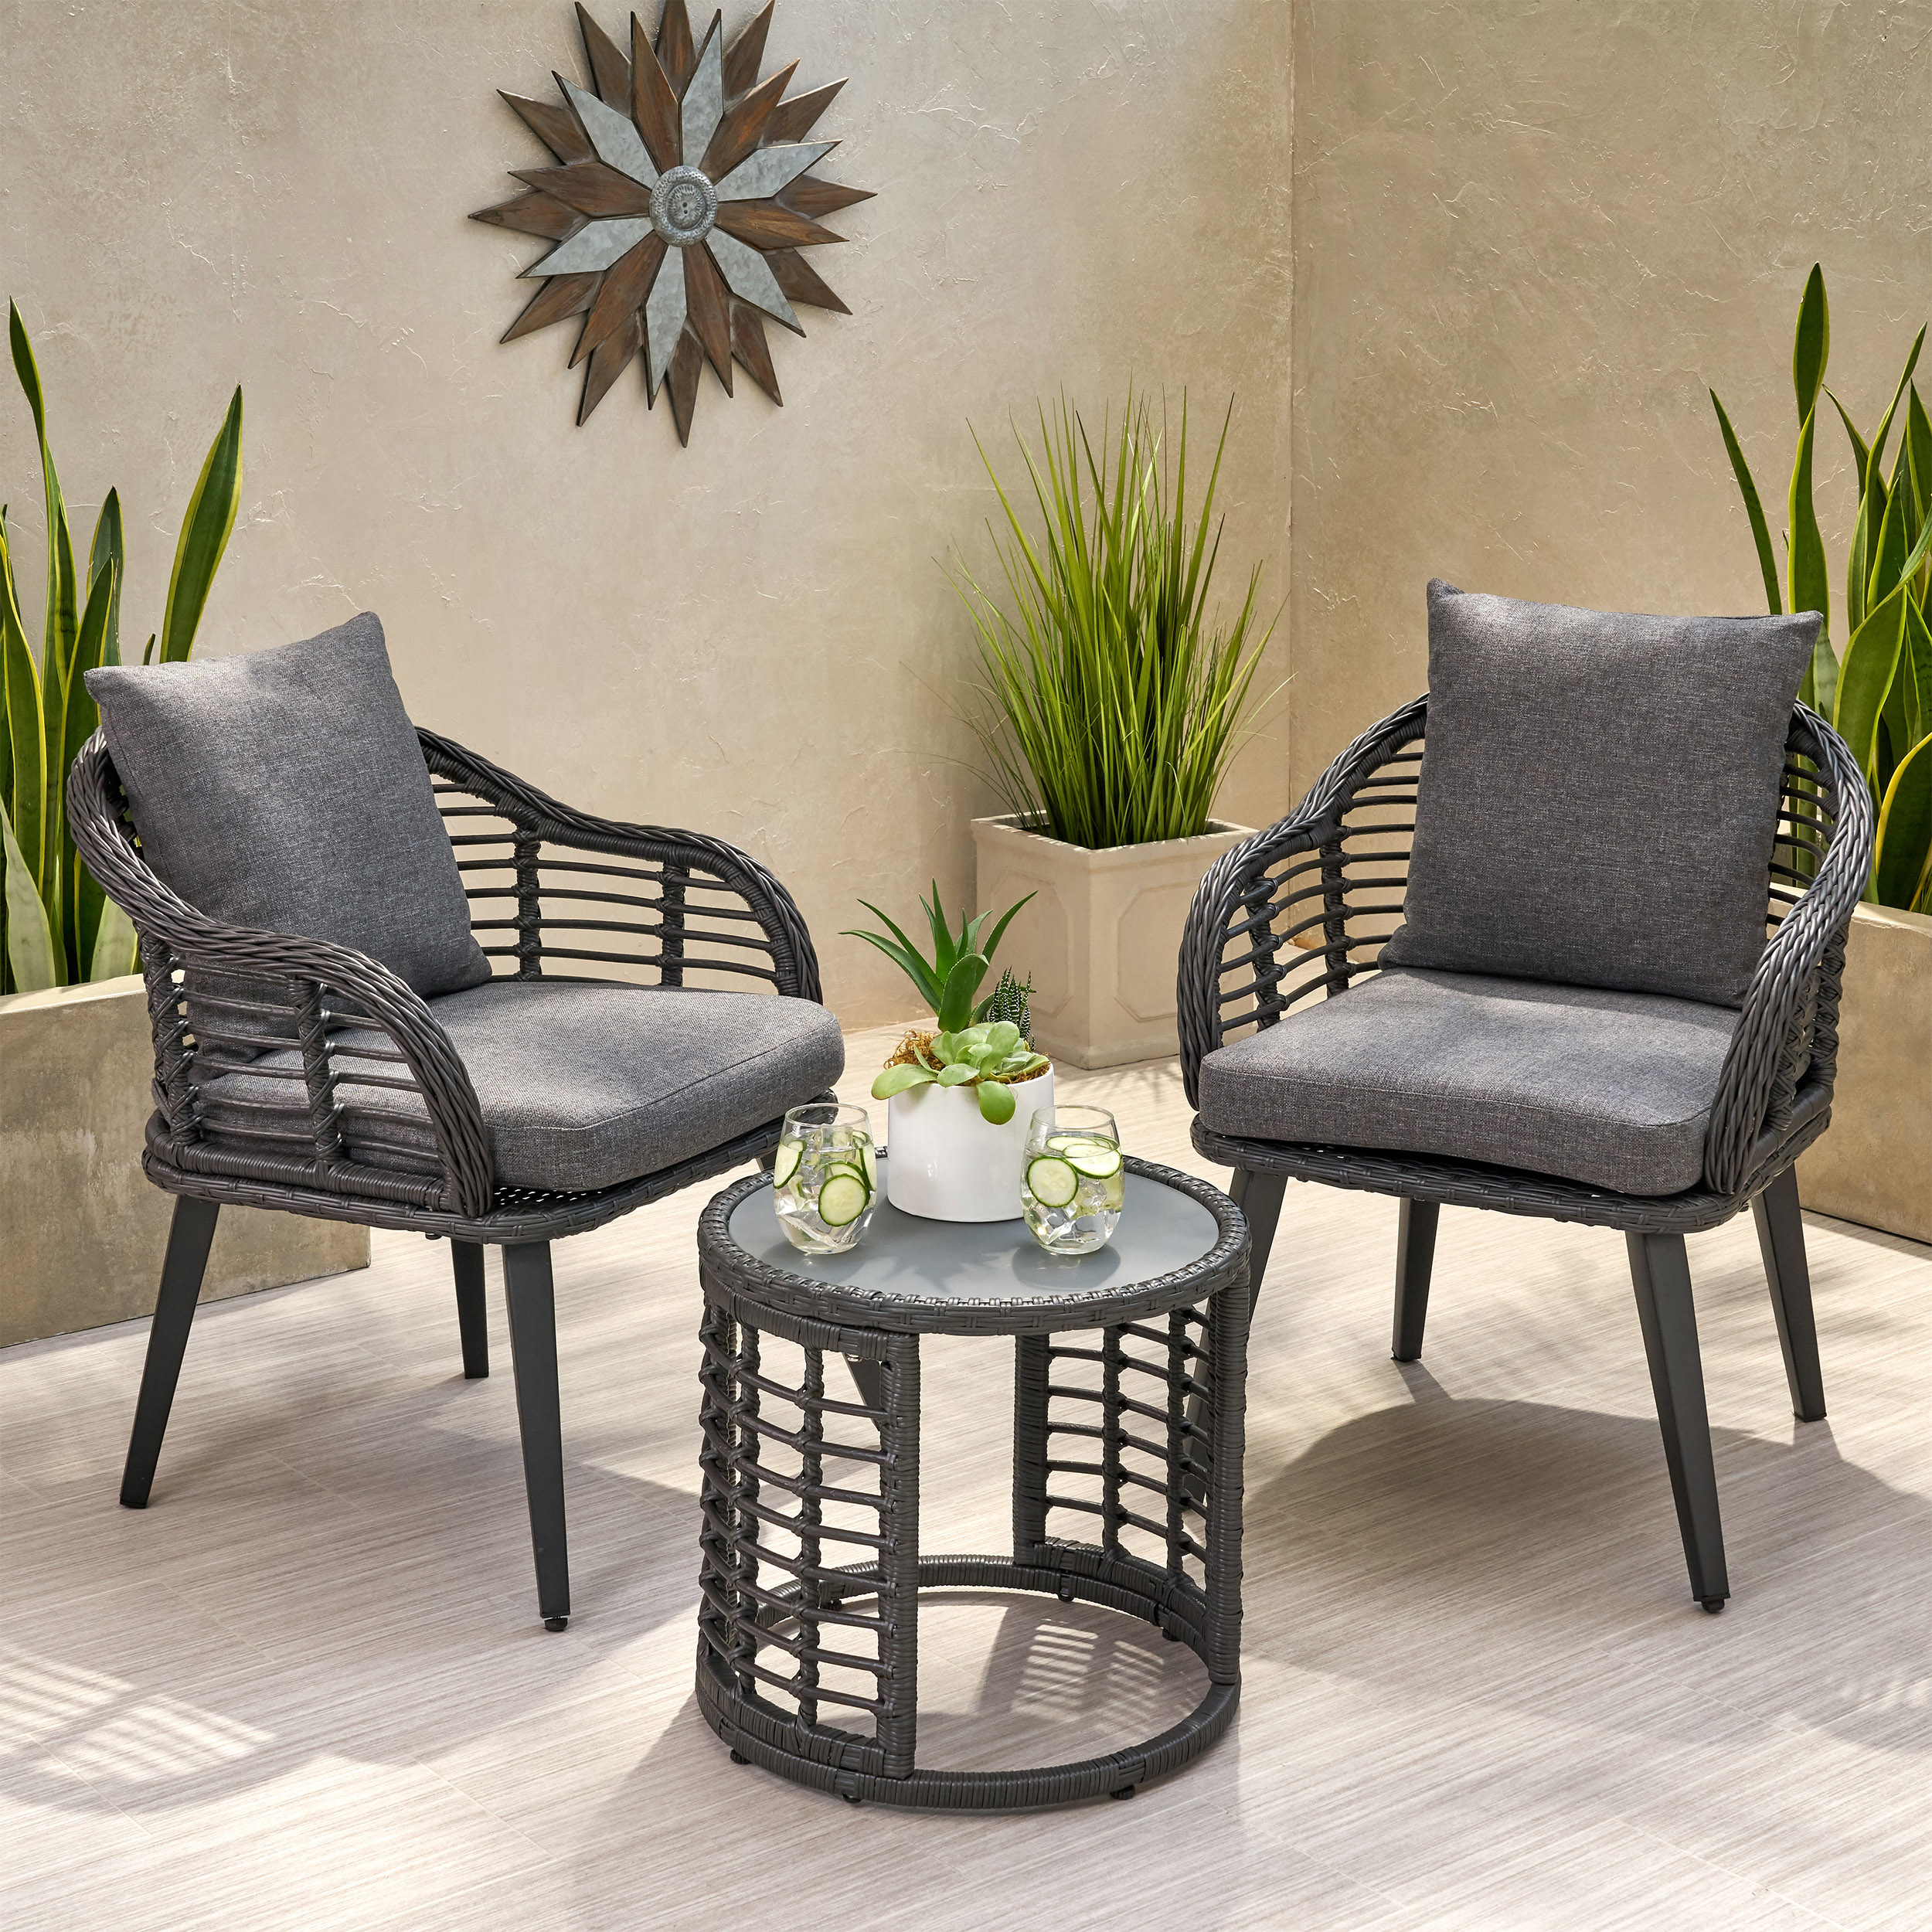 Cassie Outdoor Modern Boho 2 Seater Wicker Chat Set With Side Table - Light Brown + Black